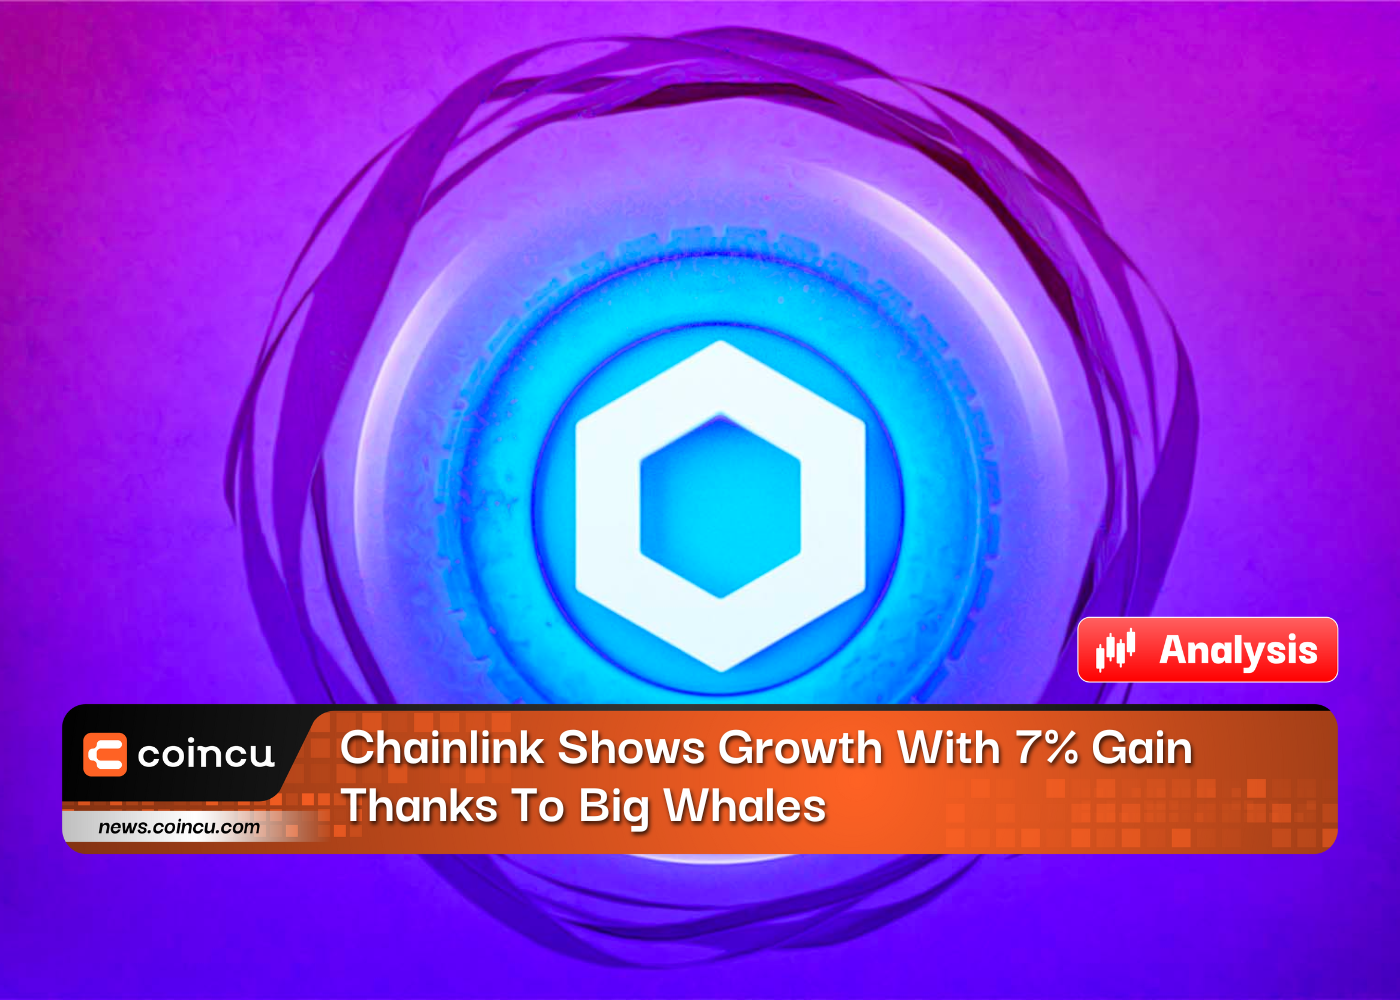 Chainlink Shows Growth With 7% Gain Thanks To Big Whales